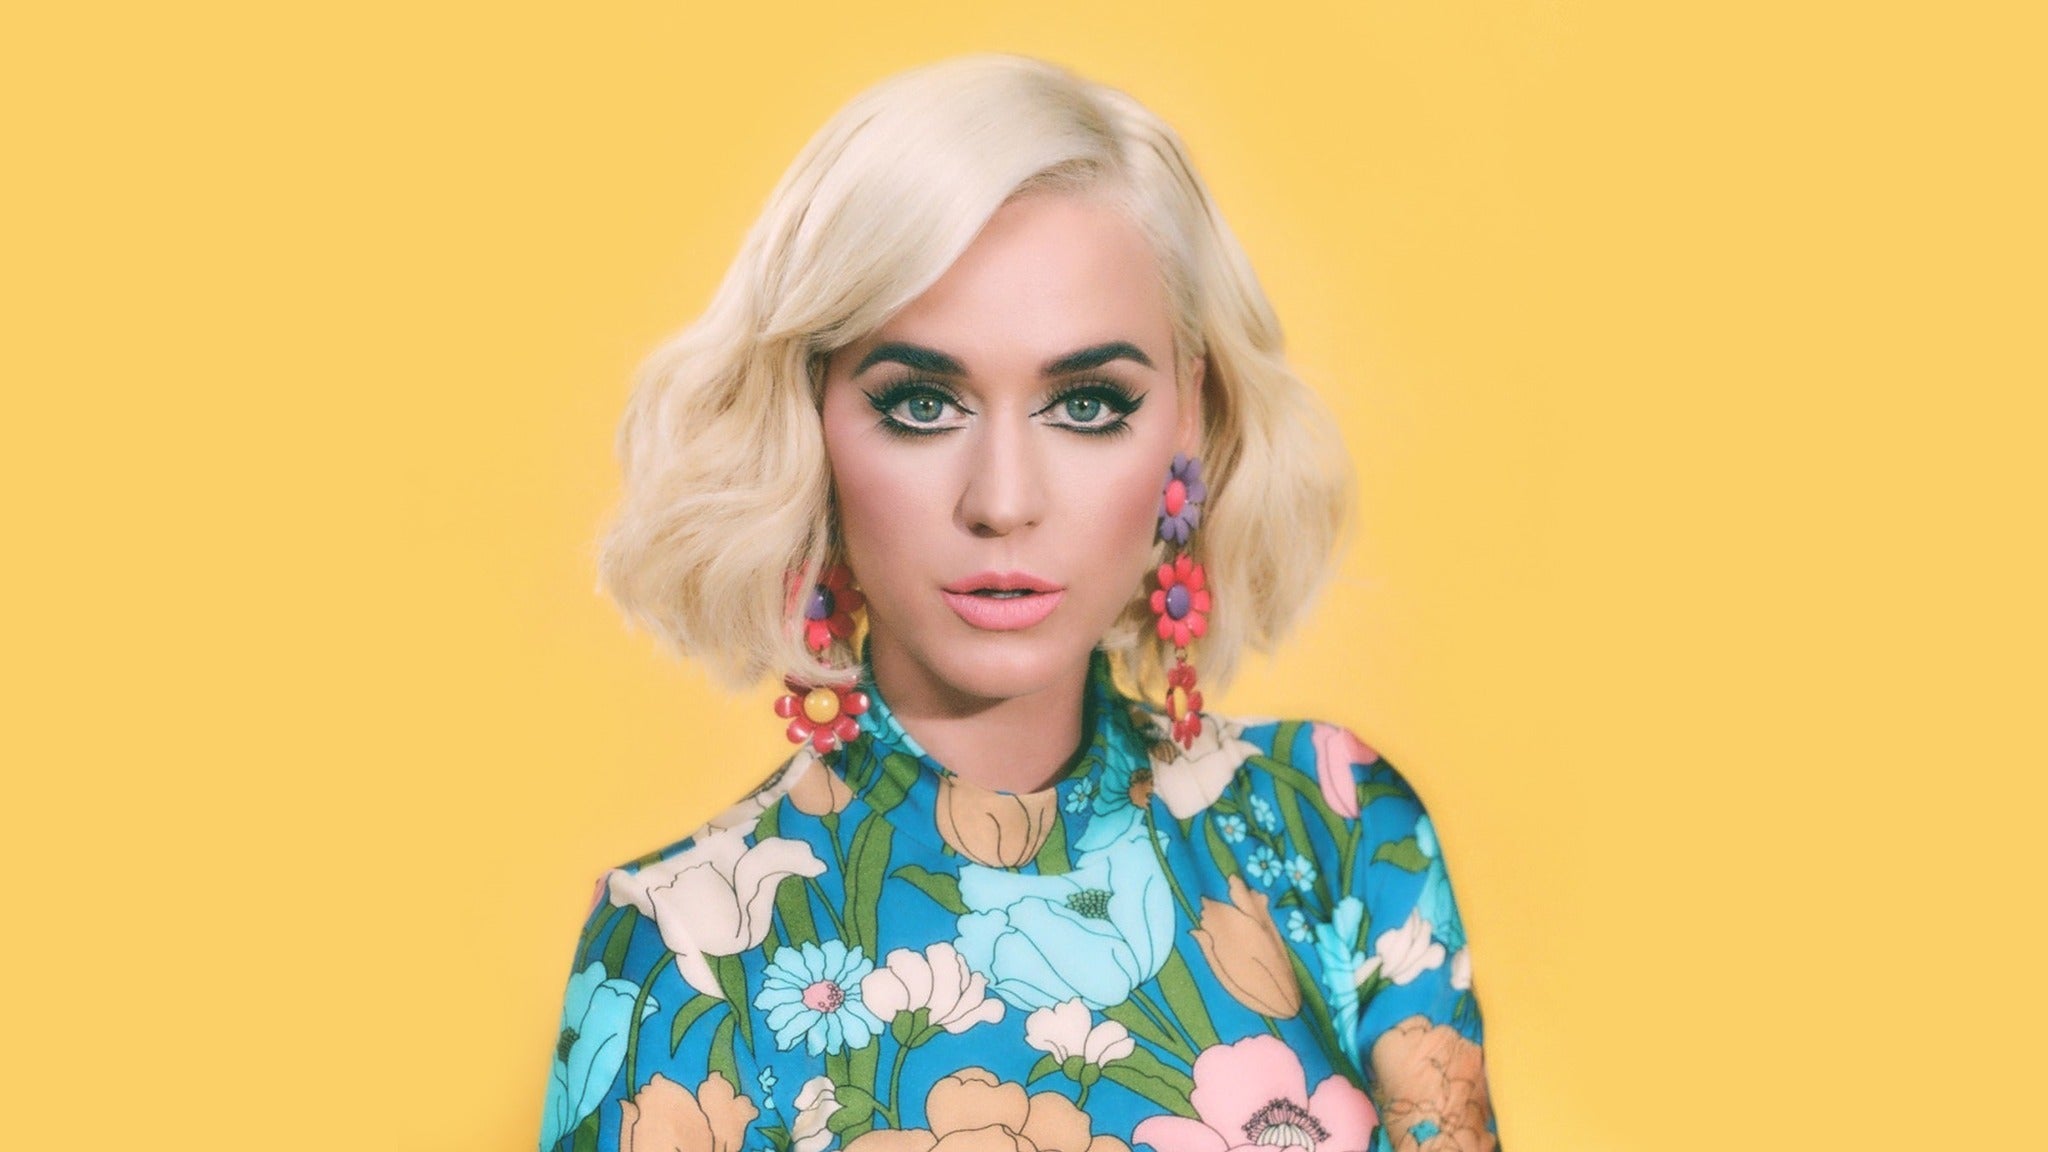 Katy Perry Prism Photoshoot Wallpapers